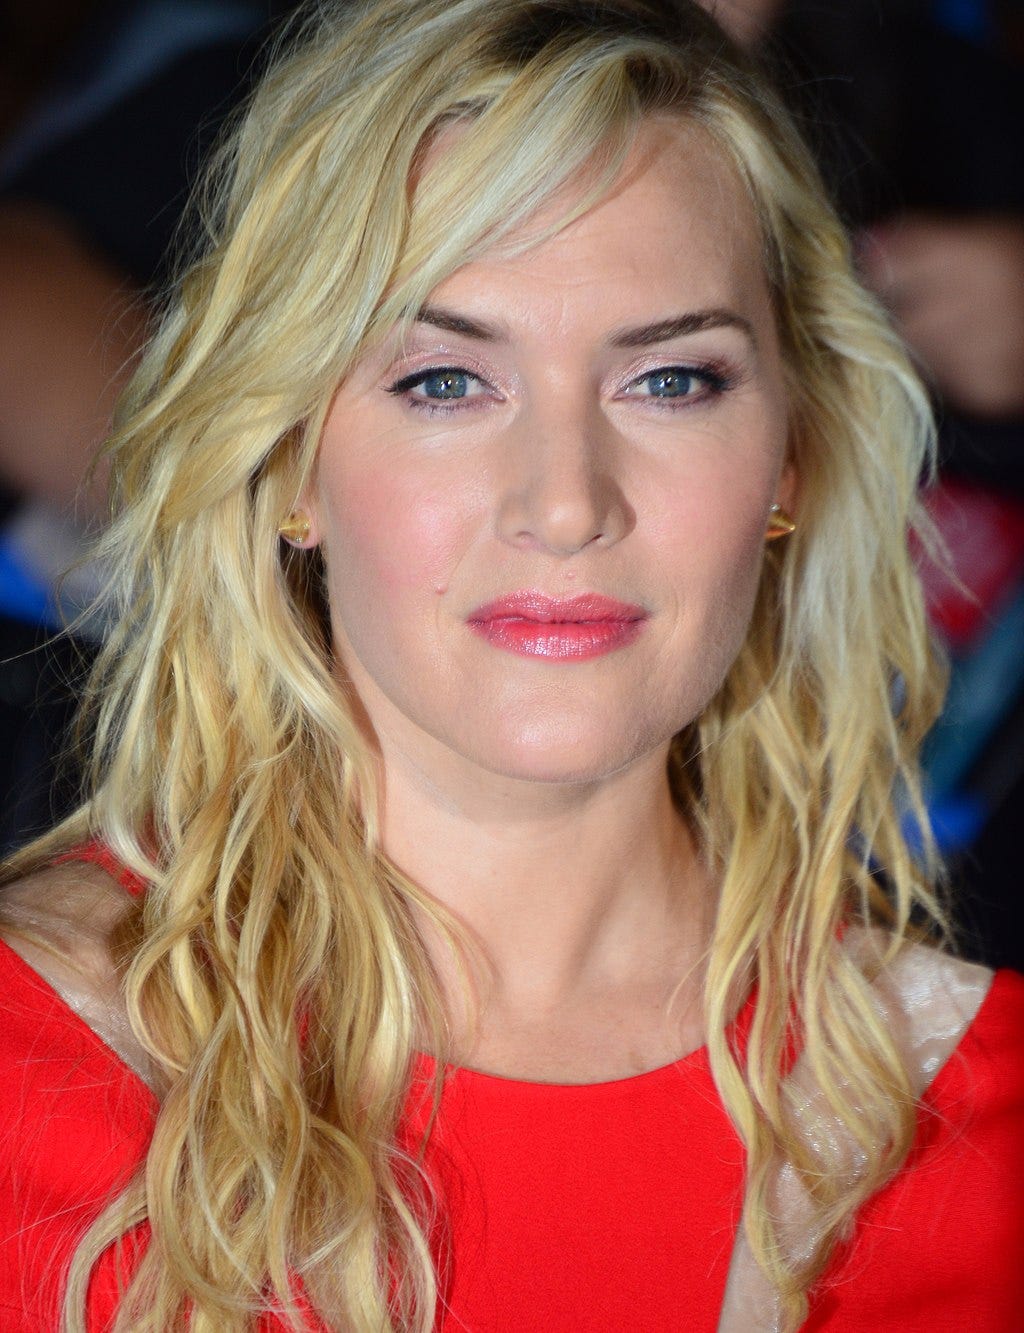 A close-up shot of Kate Winslet's face.